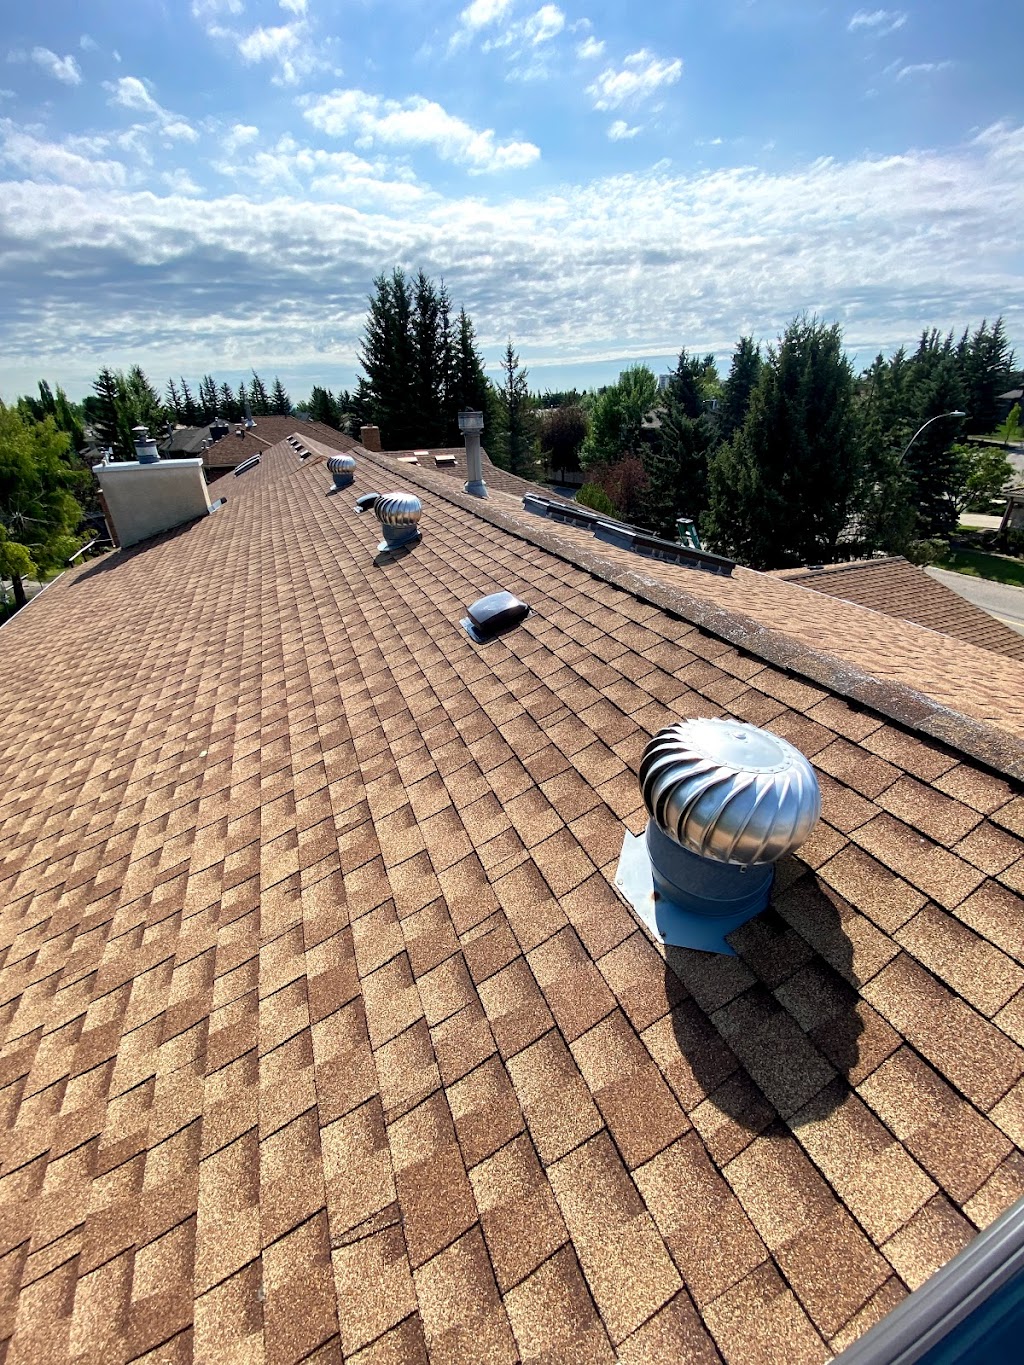 EZ Roof Repair | roofing contractor | 3101 Tuscarora Manor NW, Calgary, AB T3L 2J9, Canada | 4034047610 OR +1 403-404-7610